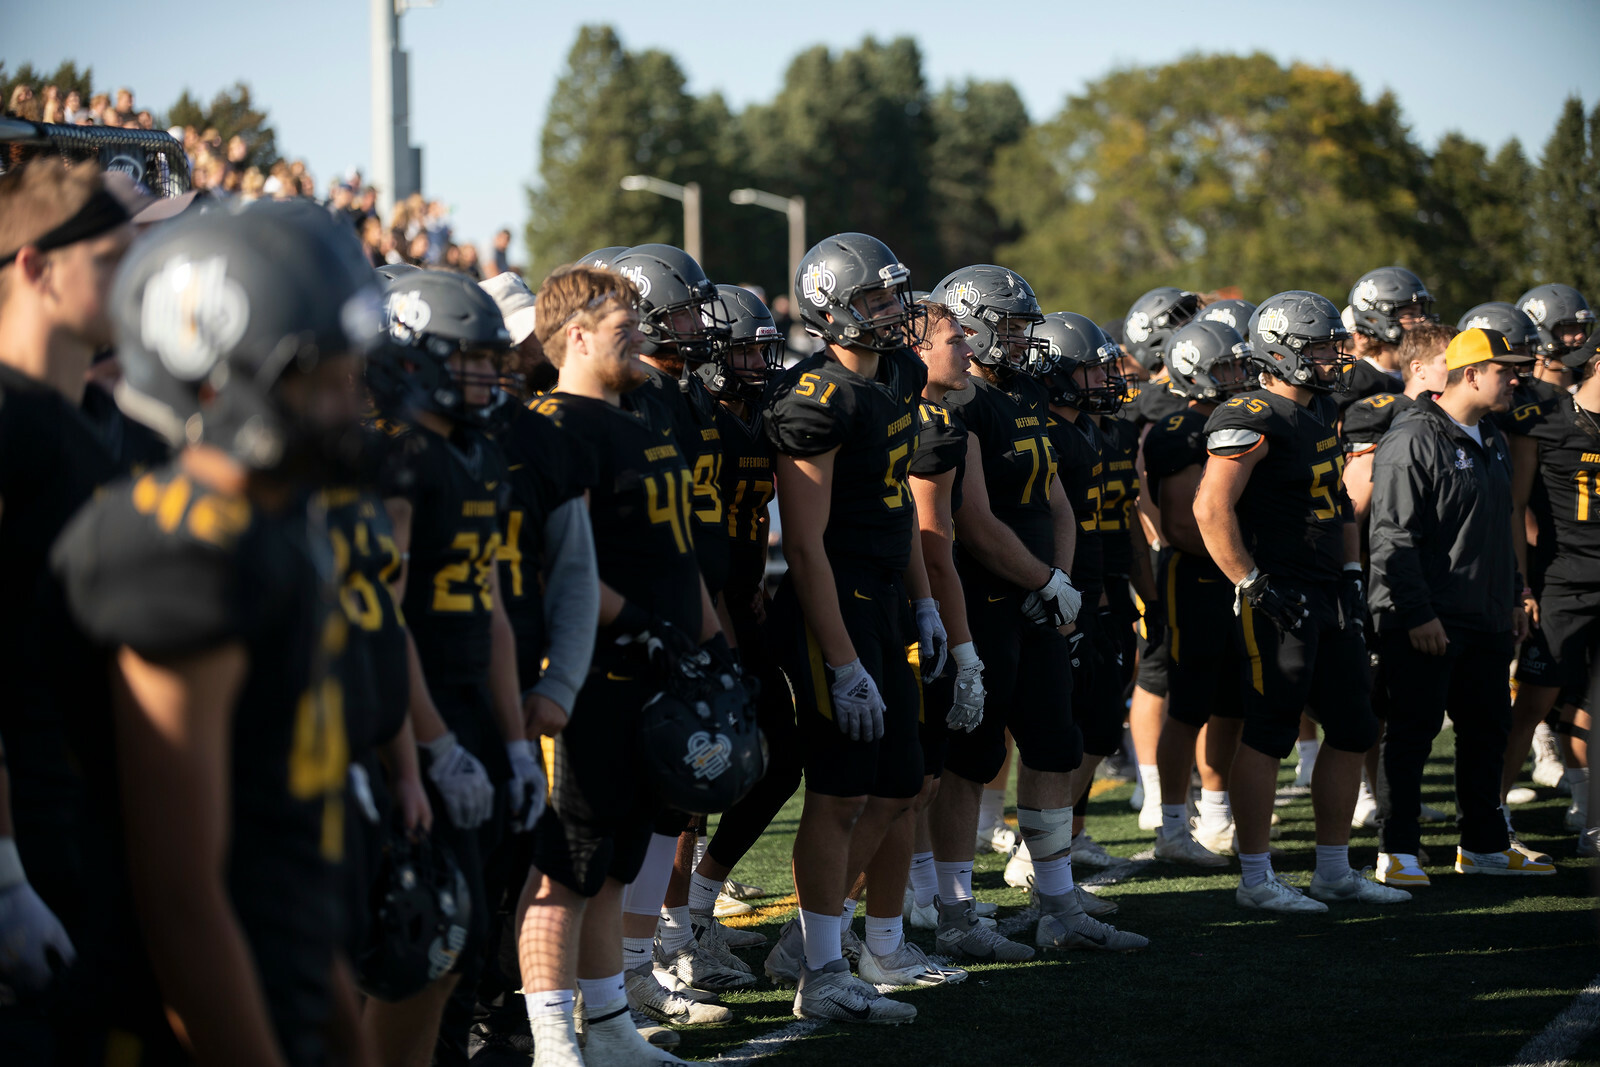 Dordt's football team gathers during a time-out